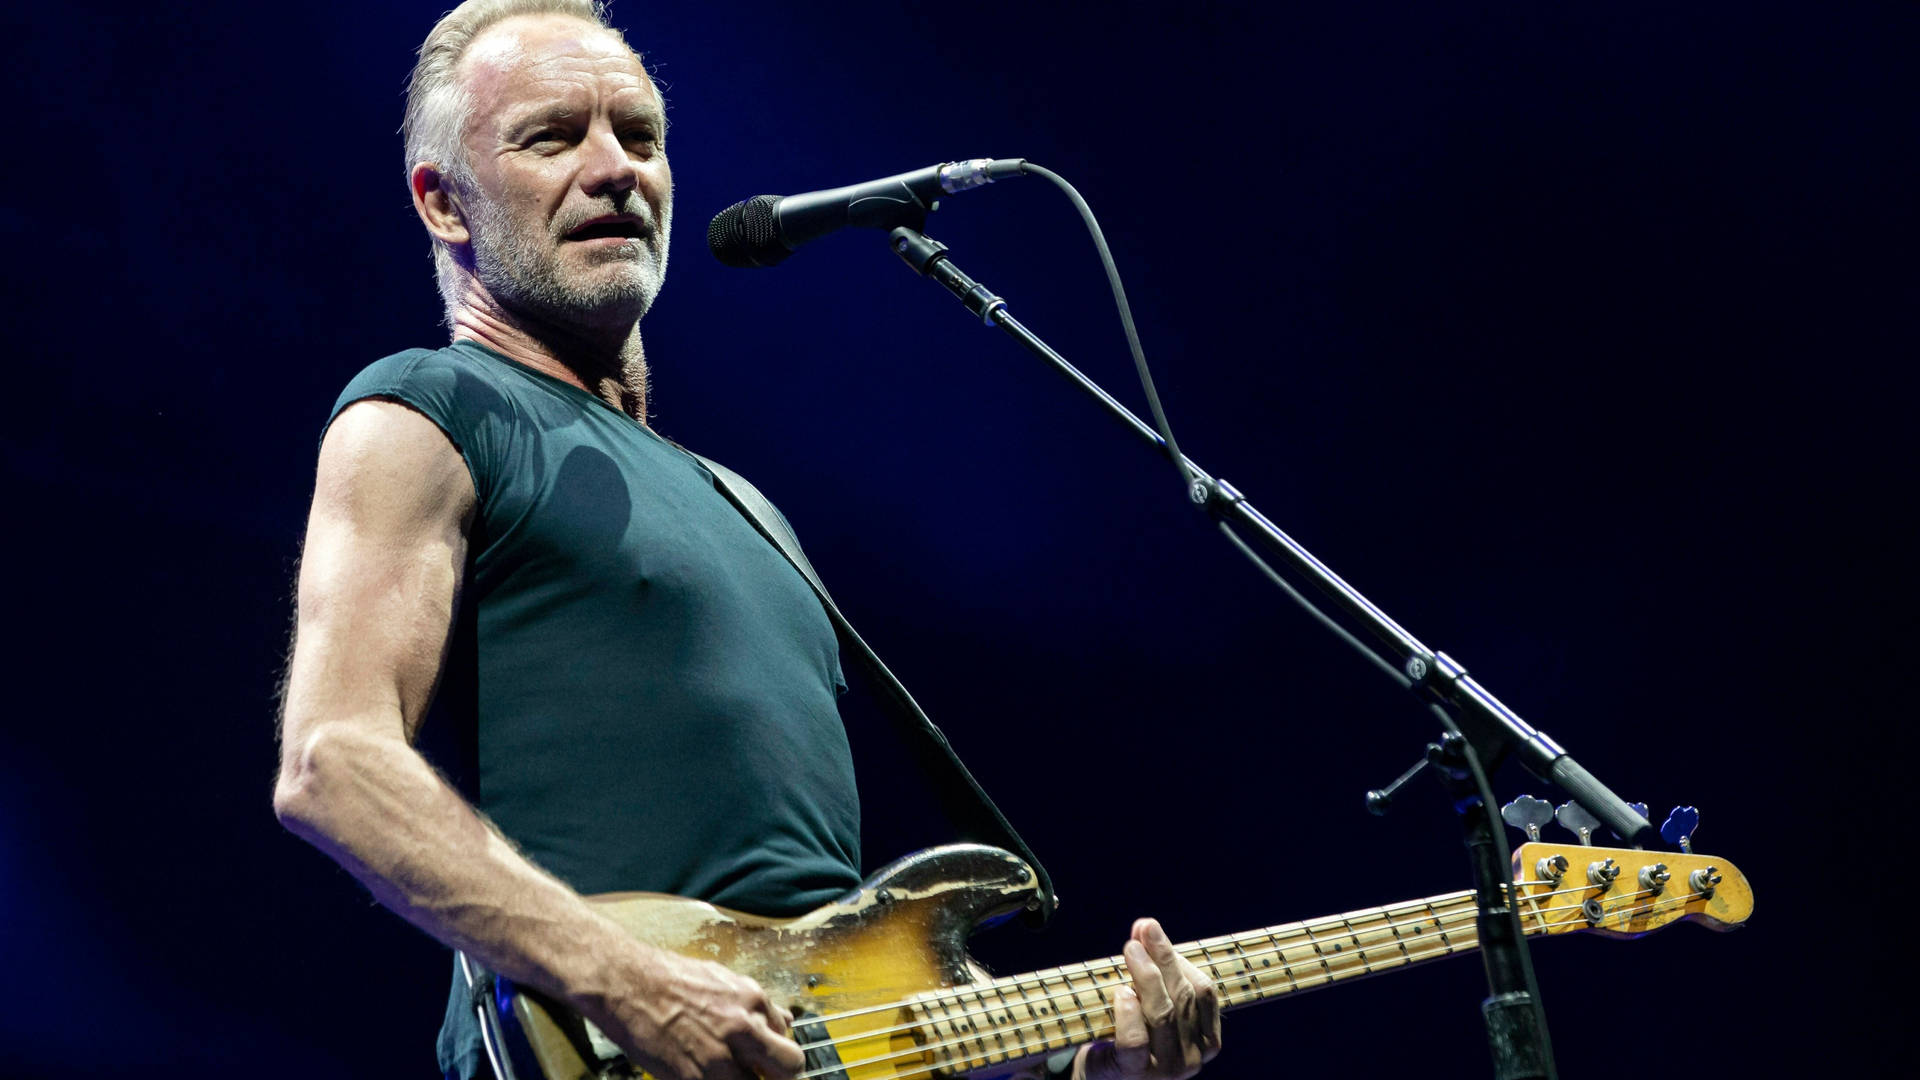 Sting Performing On Stage Wallpaper